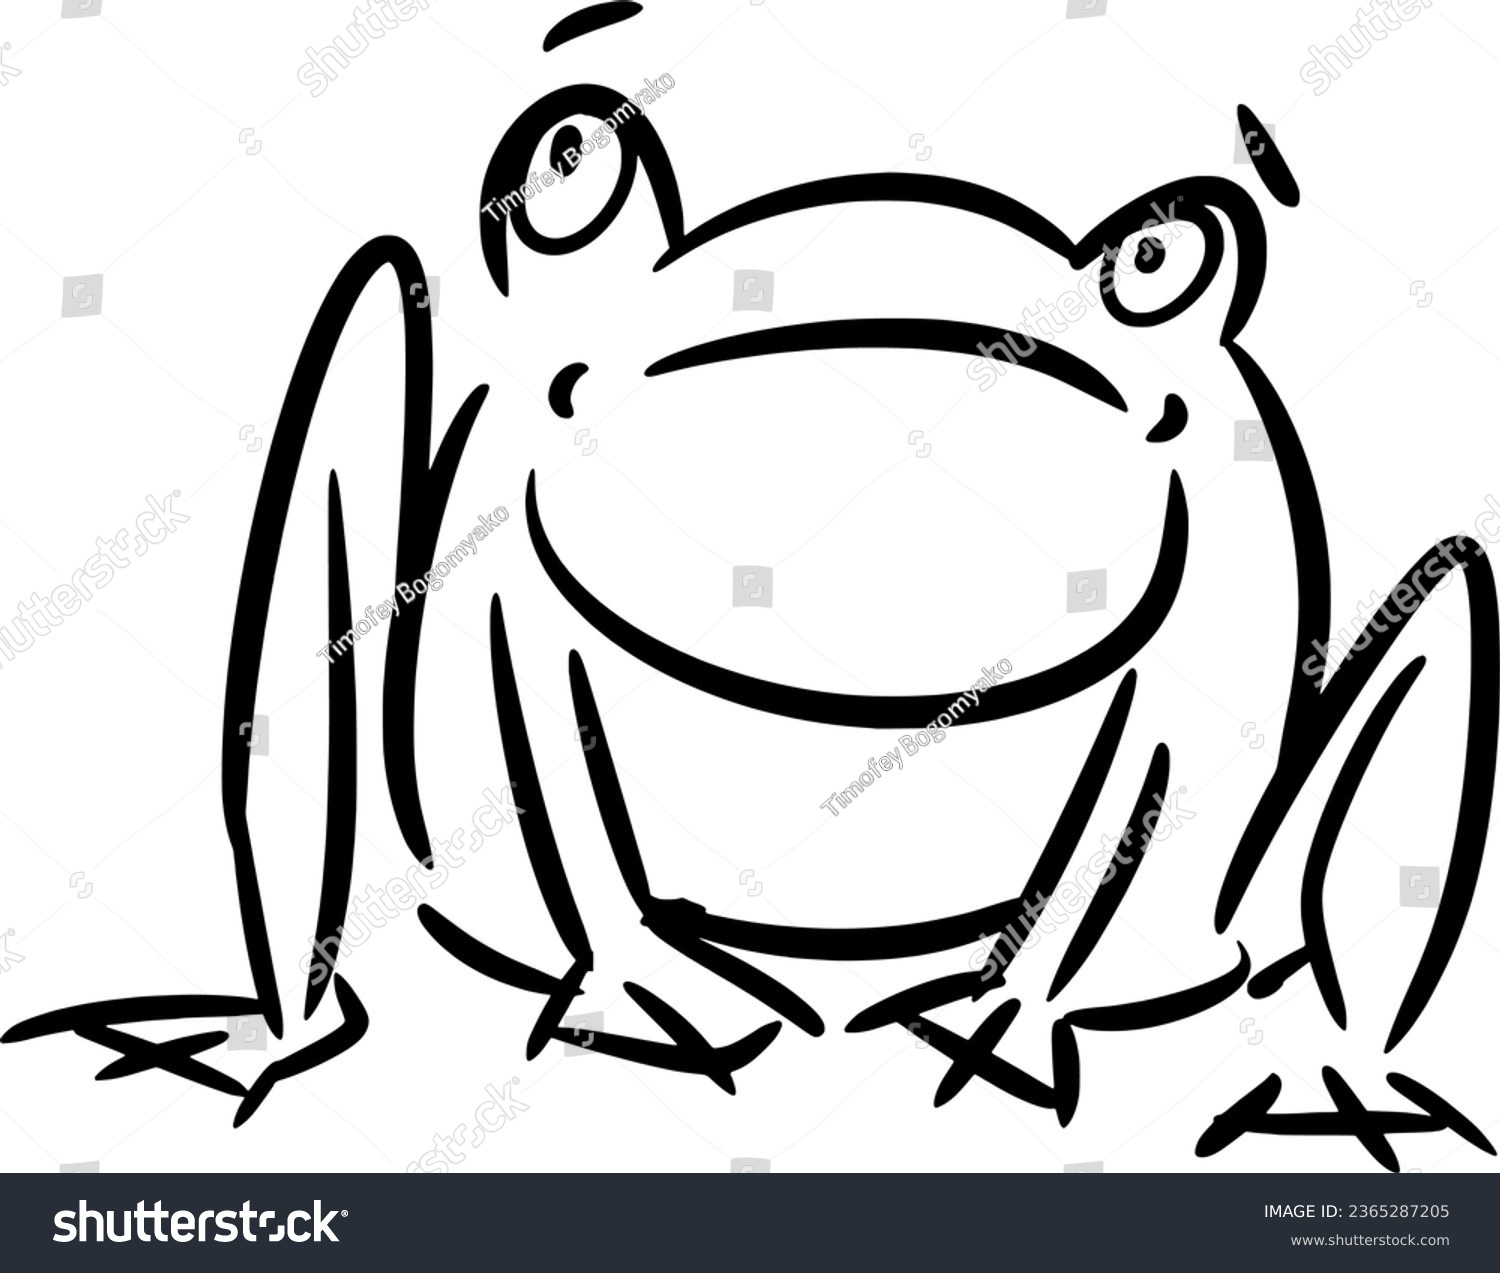 SVG of Vector drawing of a scared frog, toad. Hand drawn, contour,silhouette, sketch black and white, doodle, cartoon style. Cute, silly, amphibia, animal, swamp, fright, small, funny, water. svg